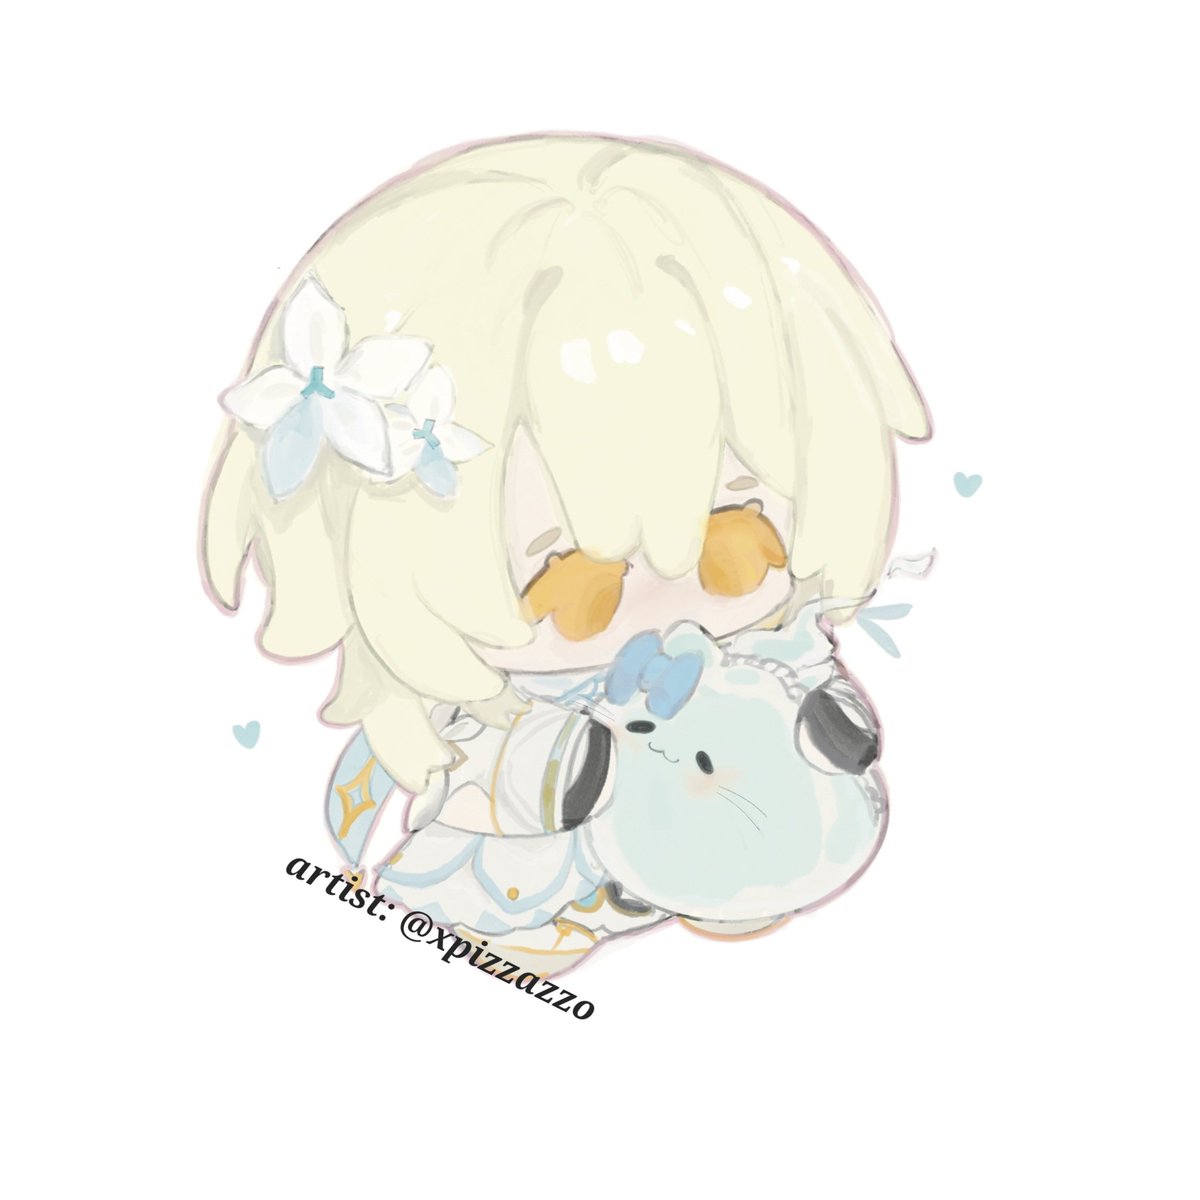 I got my new pfp 😭😭 @xpizzazzo drew my precious daughter (lumine from genshin) hug me (wisp👻) 😭 for me. It's so adorable. Thank you so much, K'Soffu 🤍